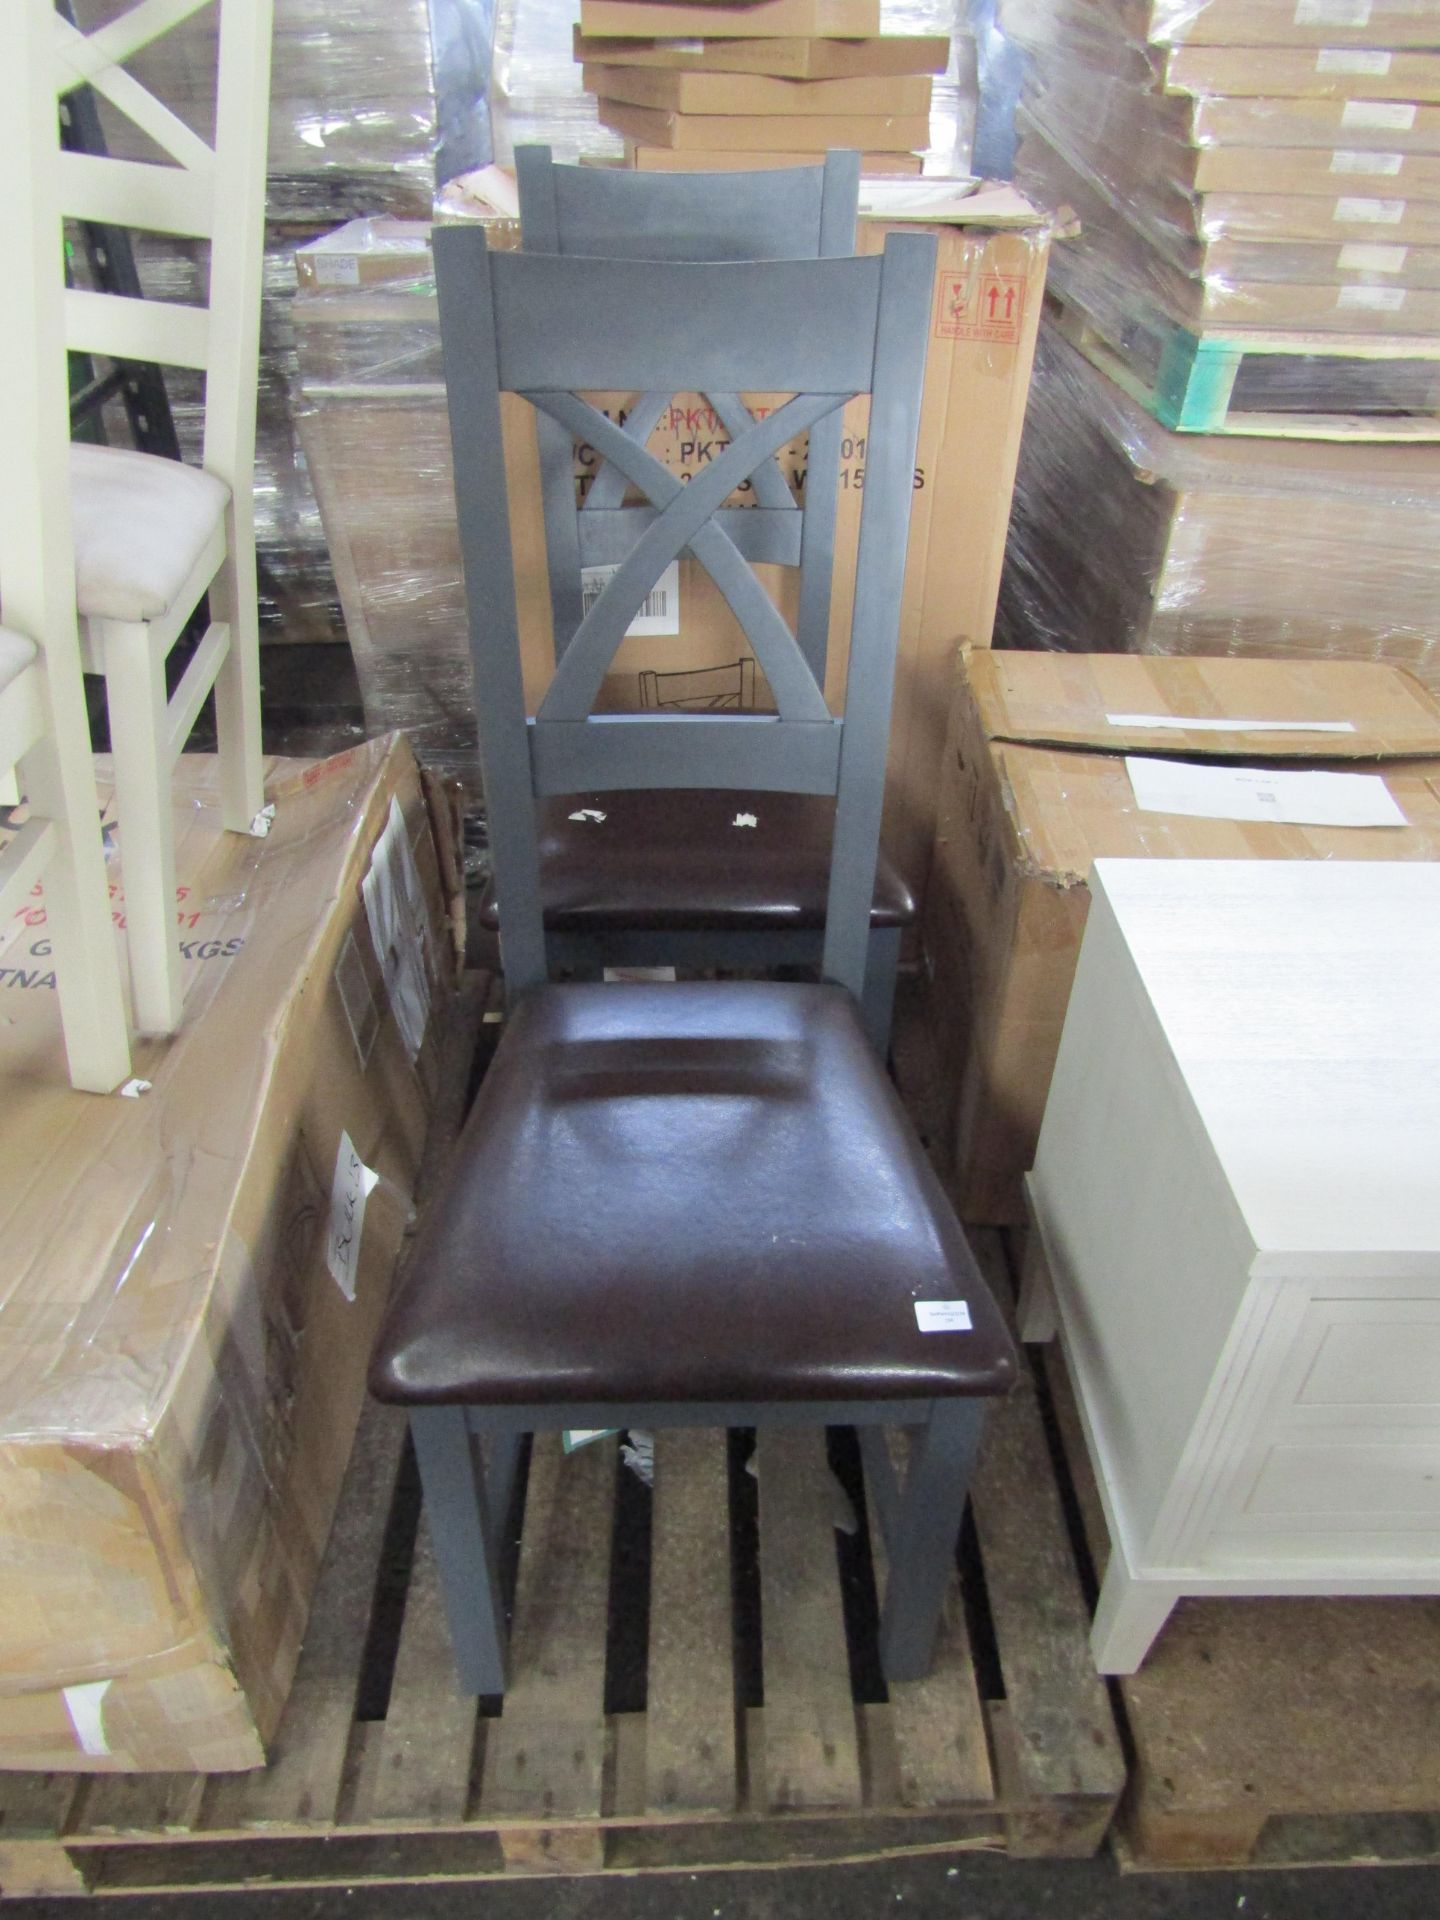 Oak Furnitureland Pair Highgate Blue Painted Chair with Brown Bicast Leather Seat RRP 380.00About